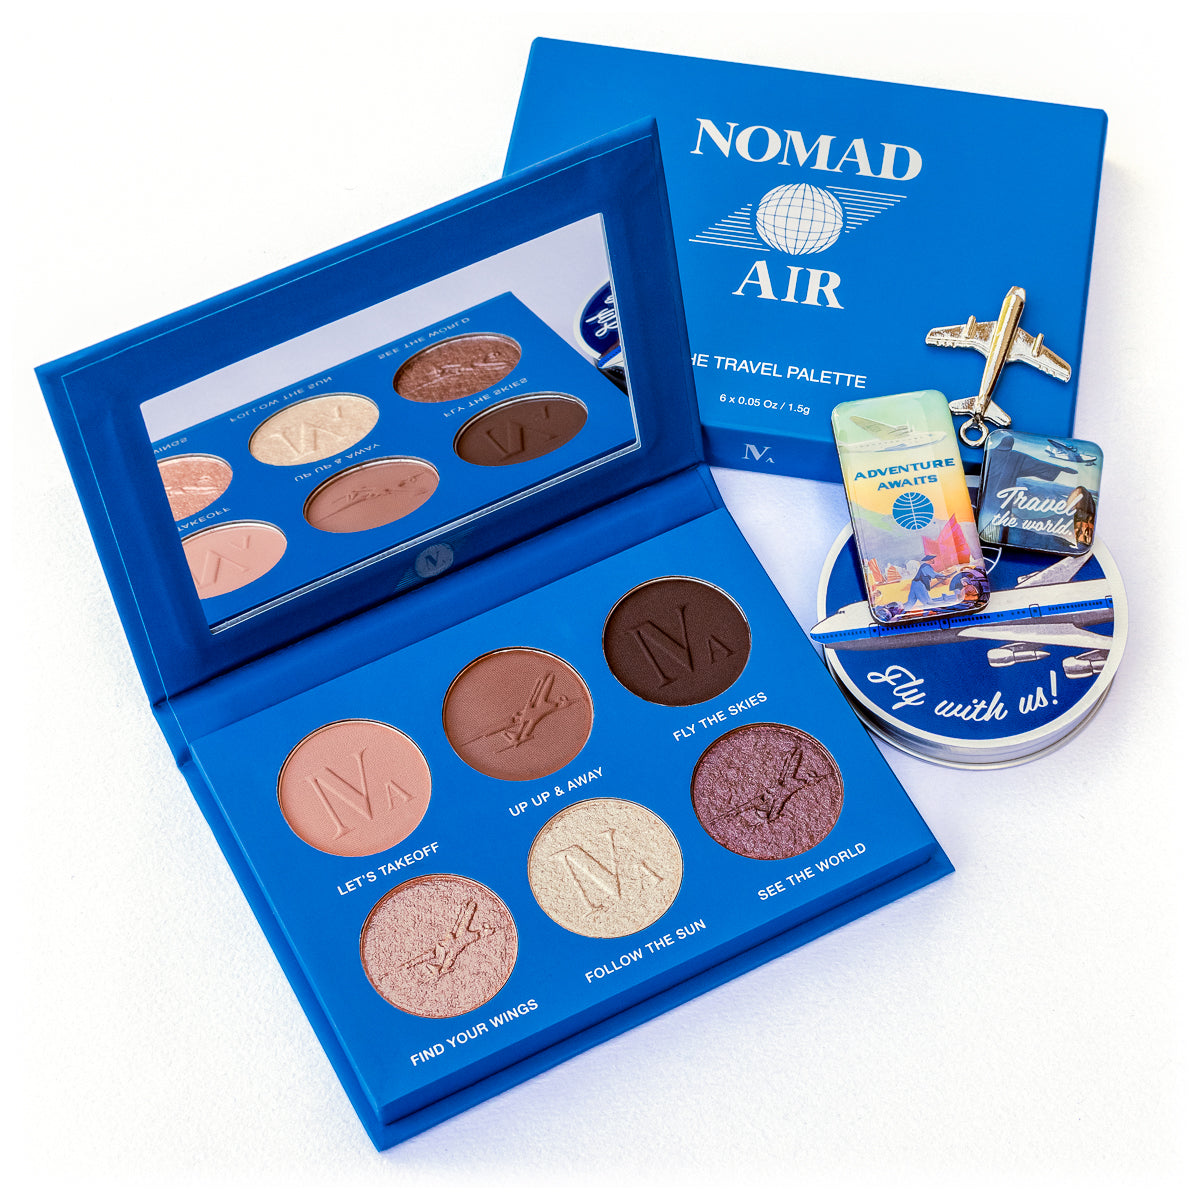 NOMAD Air - The Travel Palette